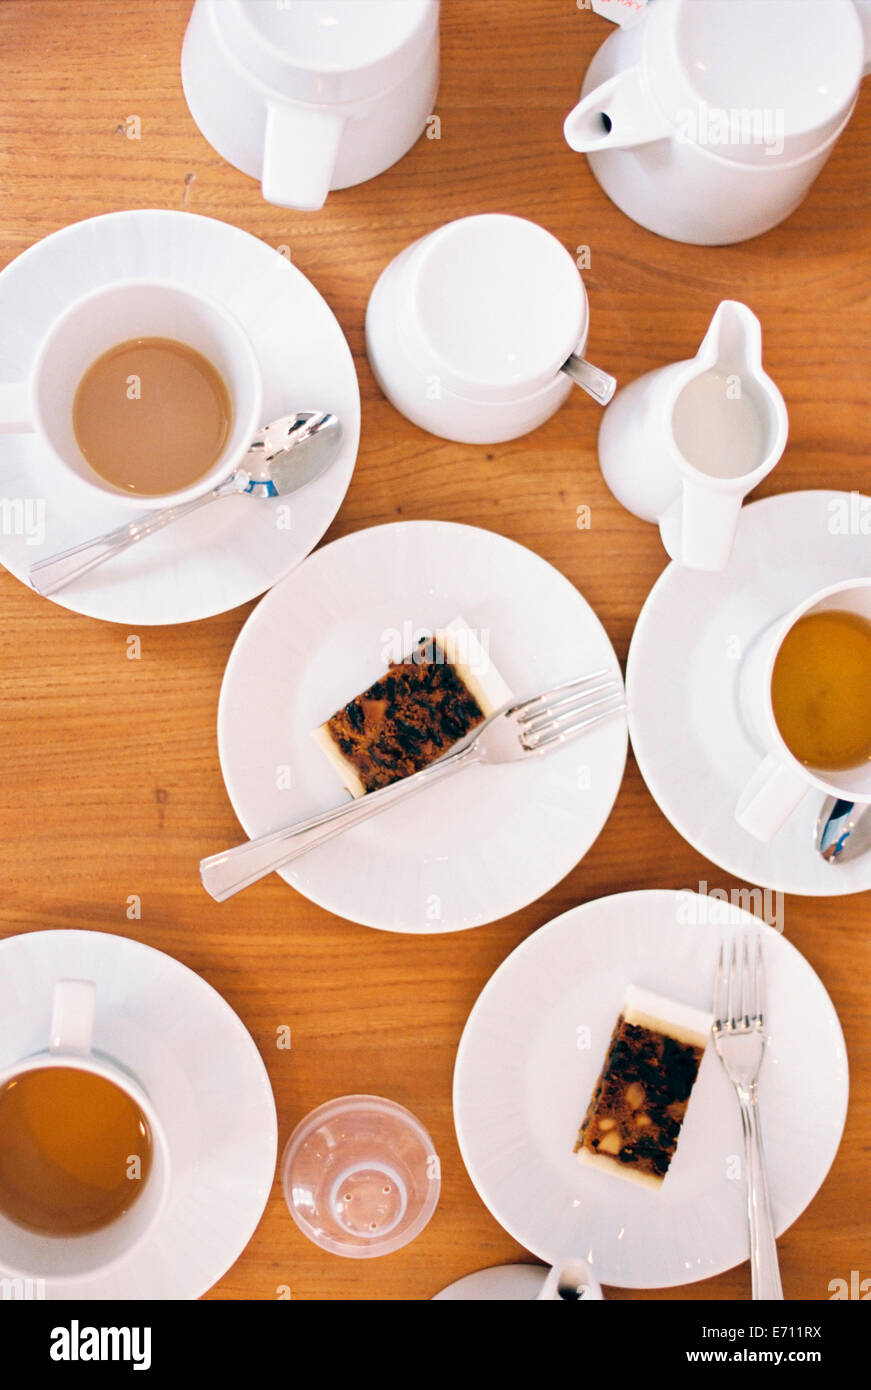 Overhead view of a table set with cups of tea, milk jugs and two slices of fruit cake on plates. Stock Photo